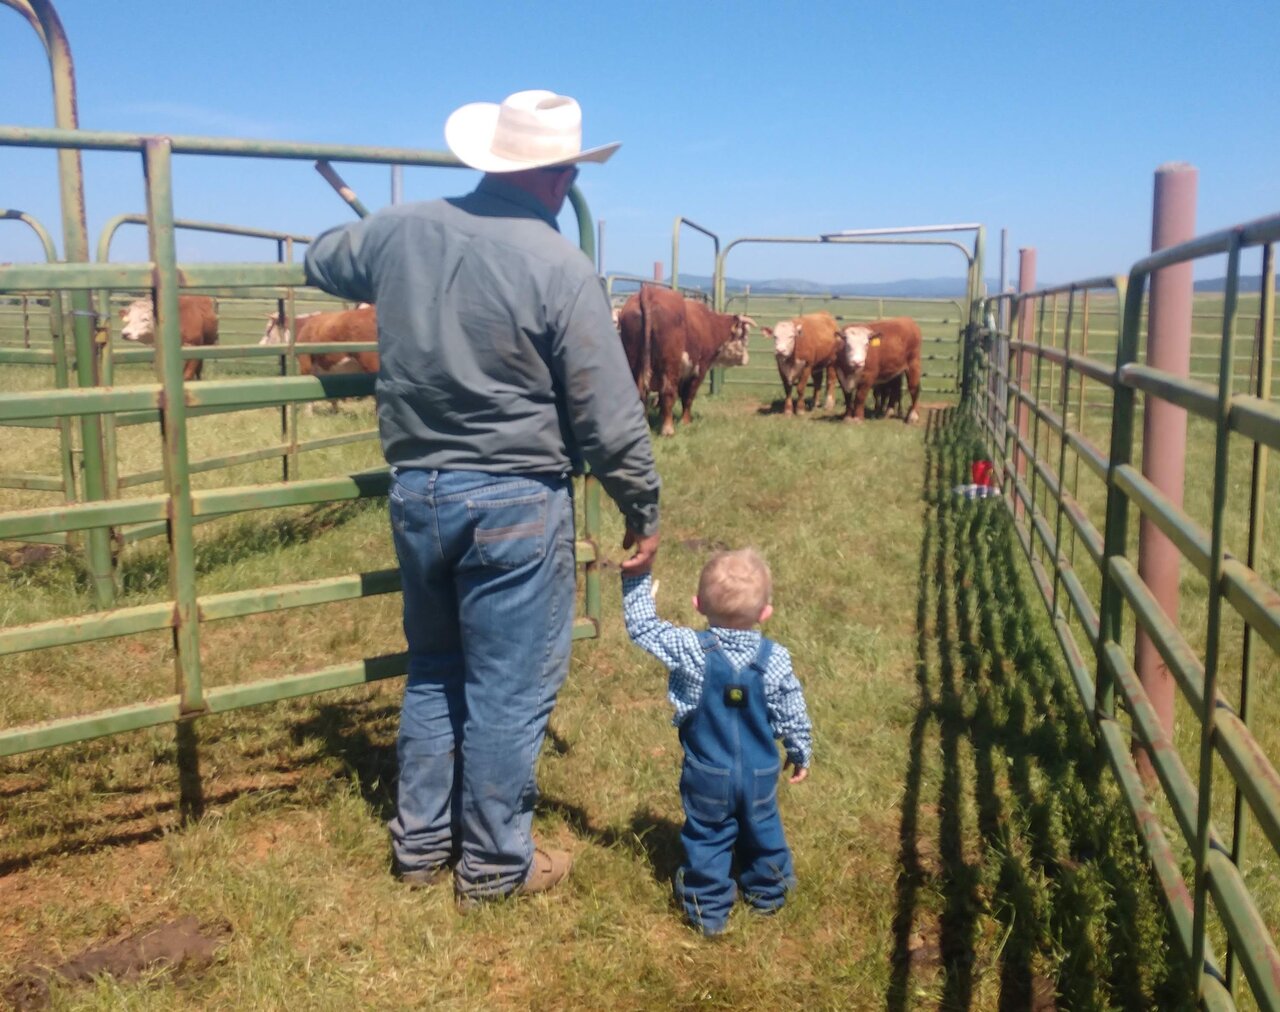 An image of a father and toddler son at a corral checking on their cows